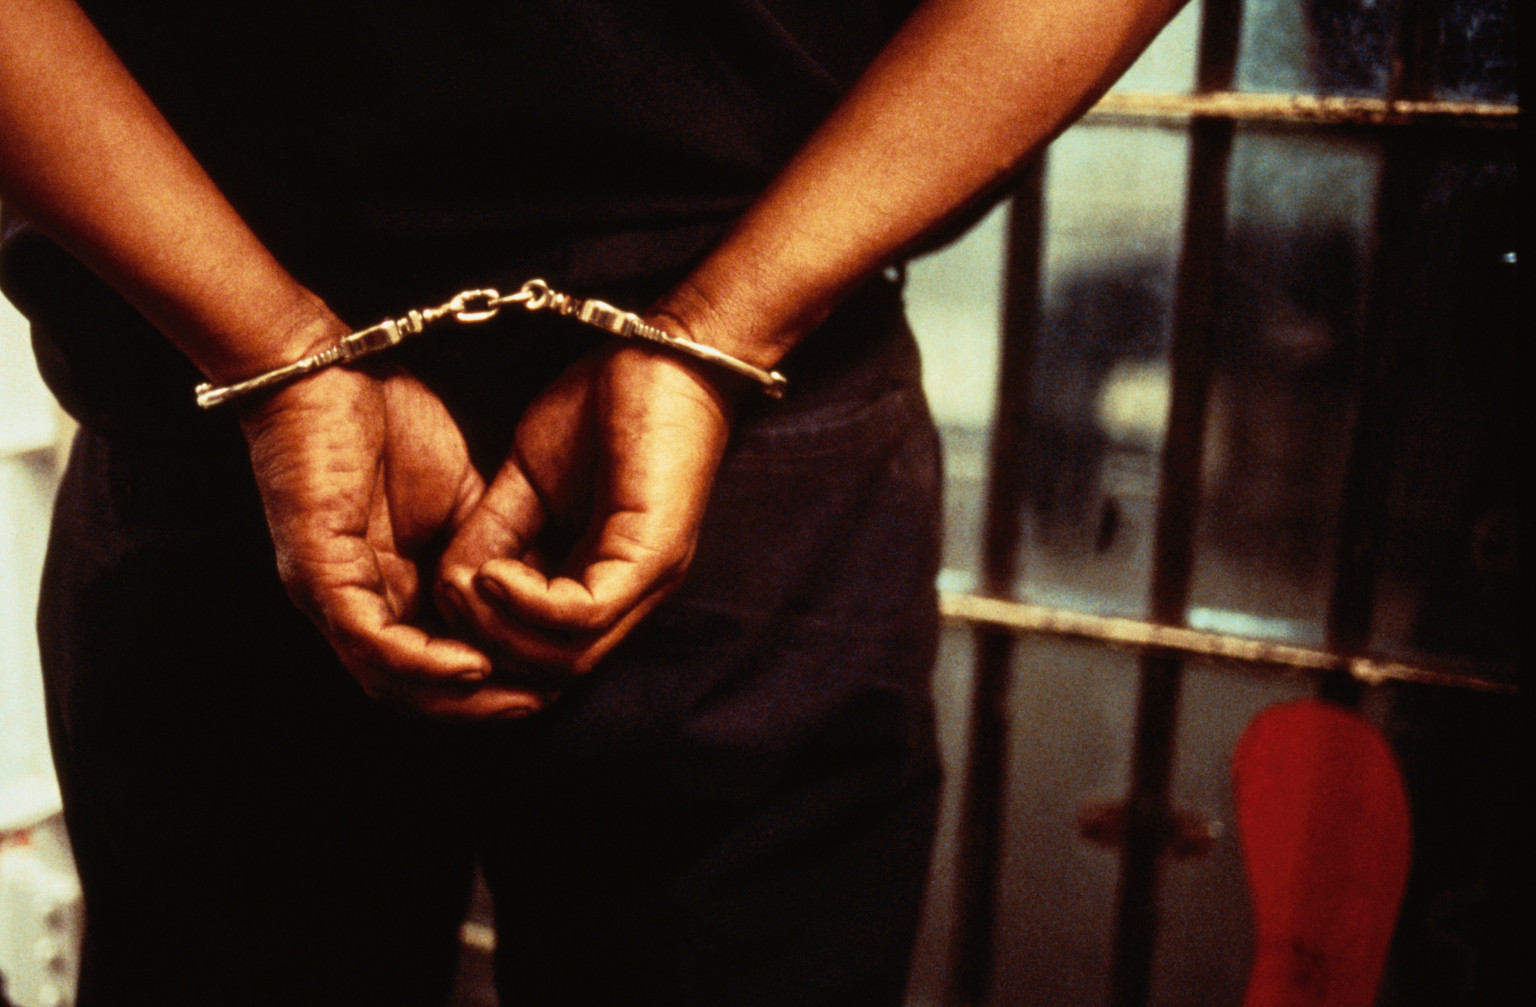 Police arrest 2 over fake kidnapping claims